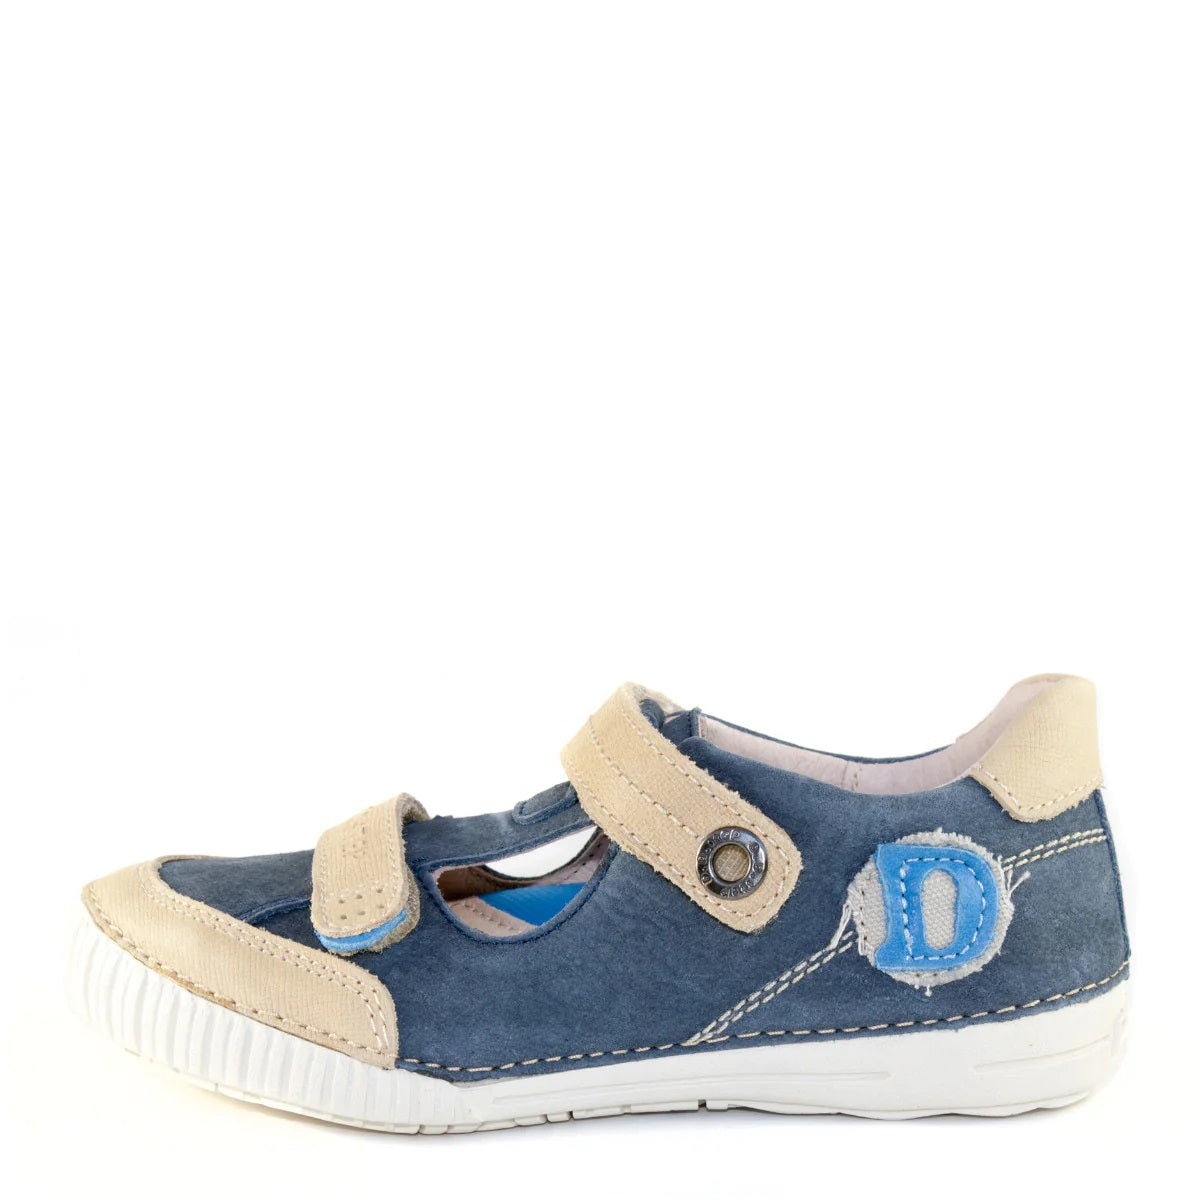 Premium quality closed toe sandals with genuine leather lining and upper in blue and beige with double velcro strap. Thanks to its high level of specialization, D.D. Step knows exactly what your child’s feet need, to develop properly in the various phases of growth. The exceptional comfort these shoes provide assure the well-being and happiness of your child.